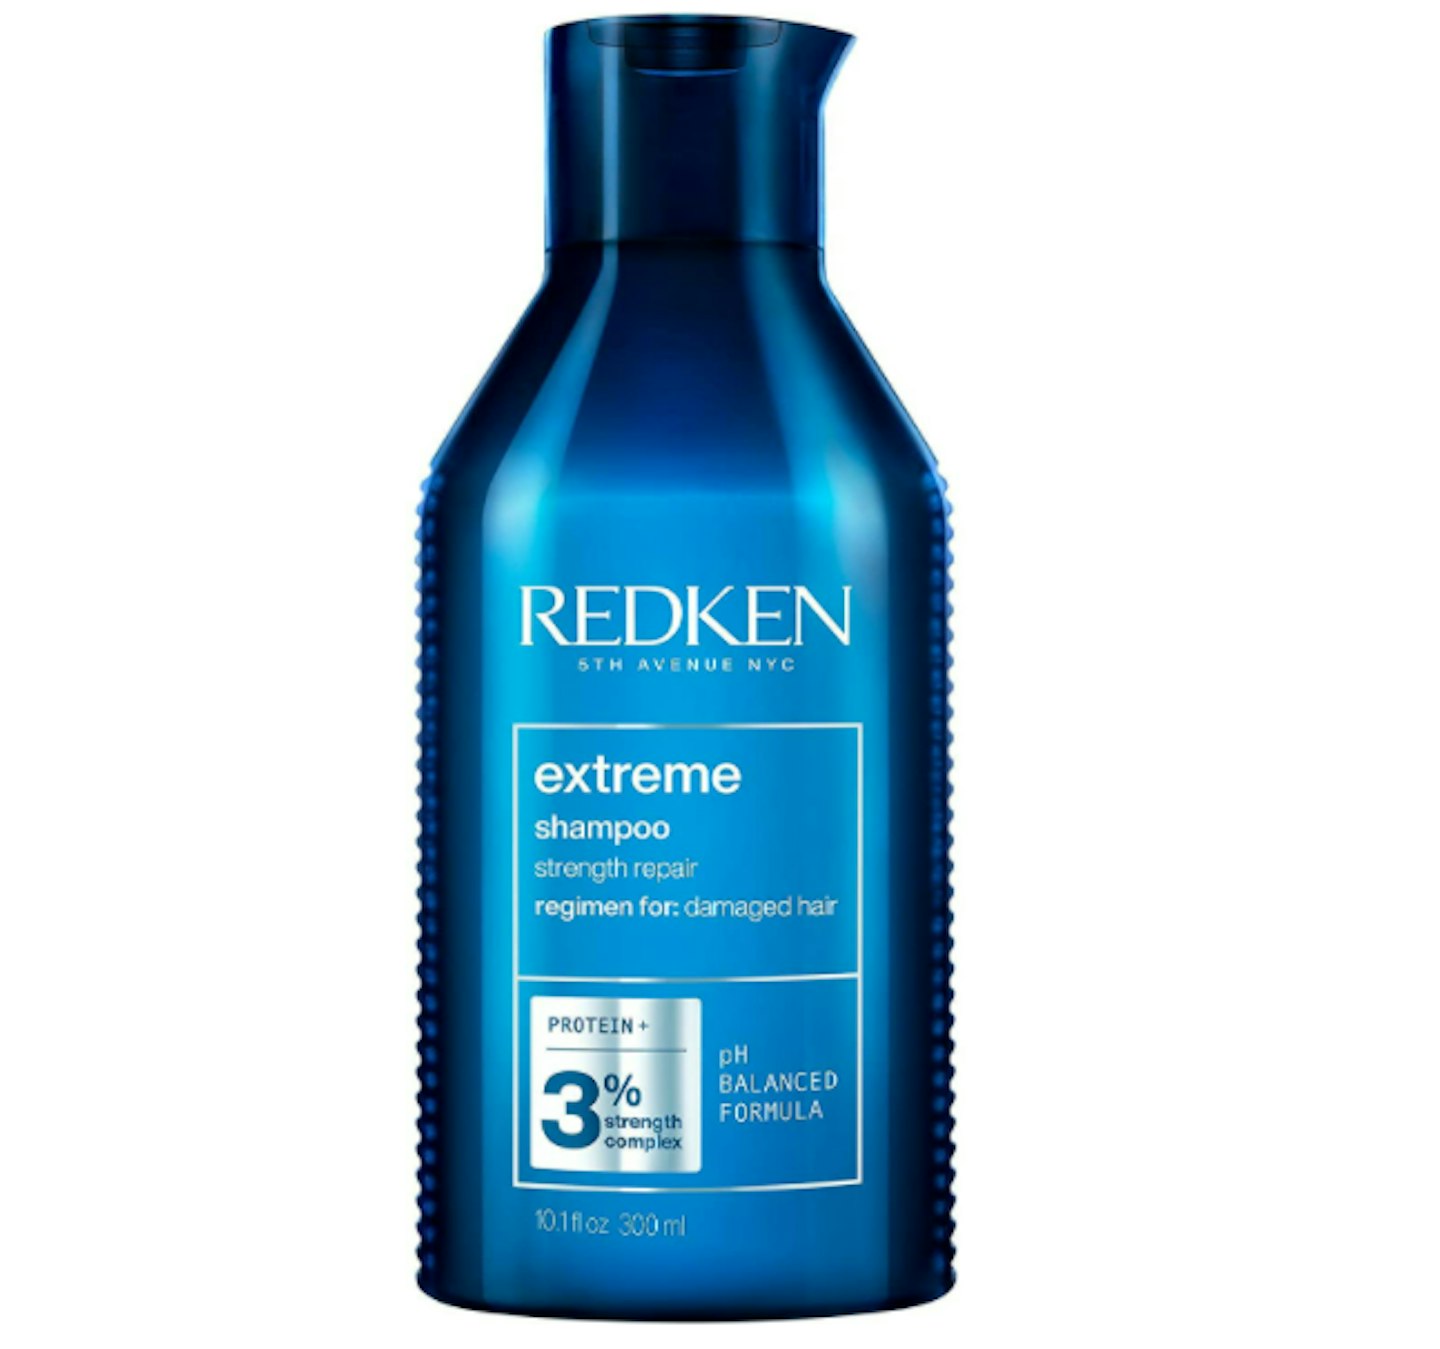 Redken | Extreme | Shampoo | For Damaged Hair | Repairs Strength & Adds Flexibility